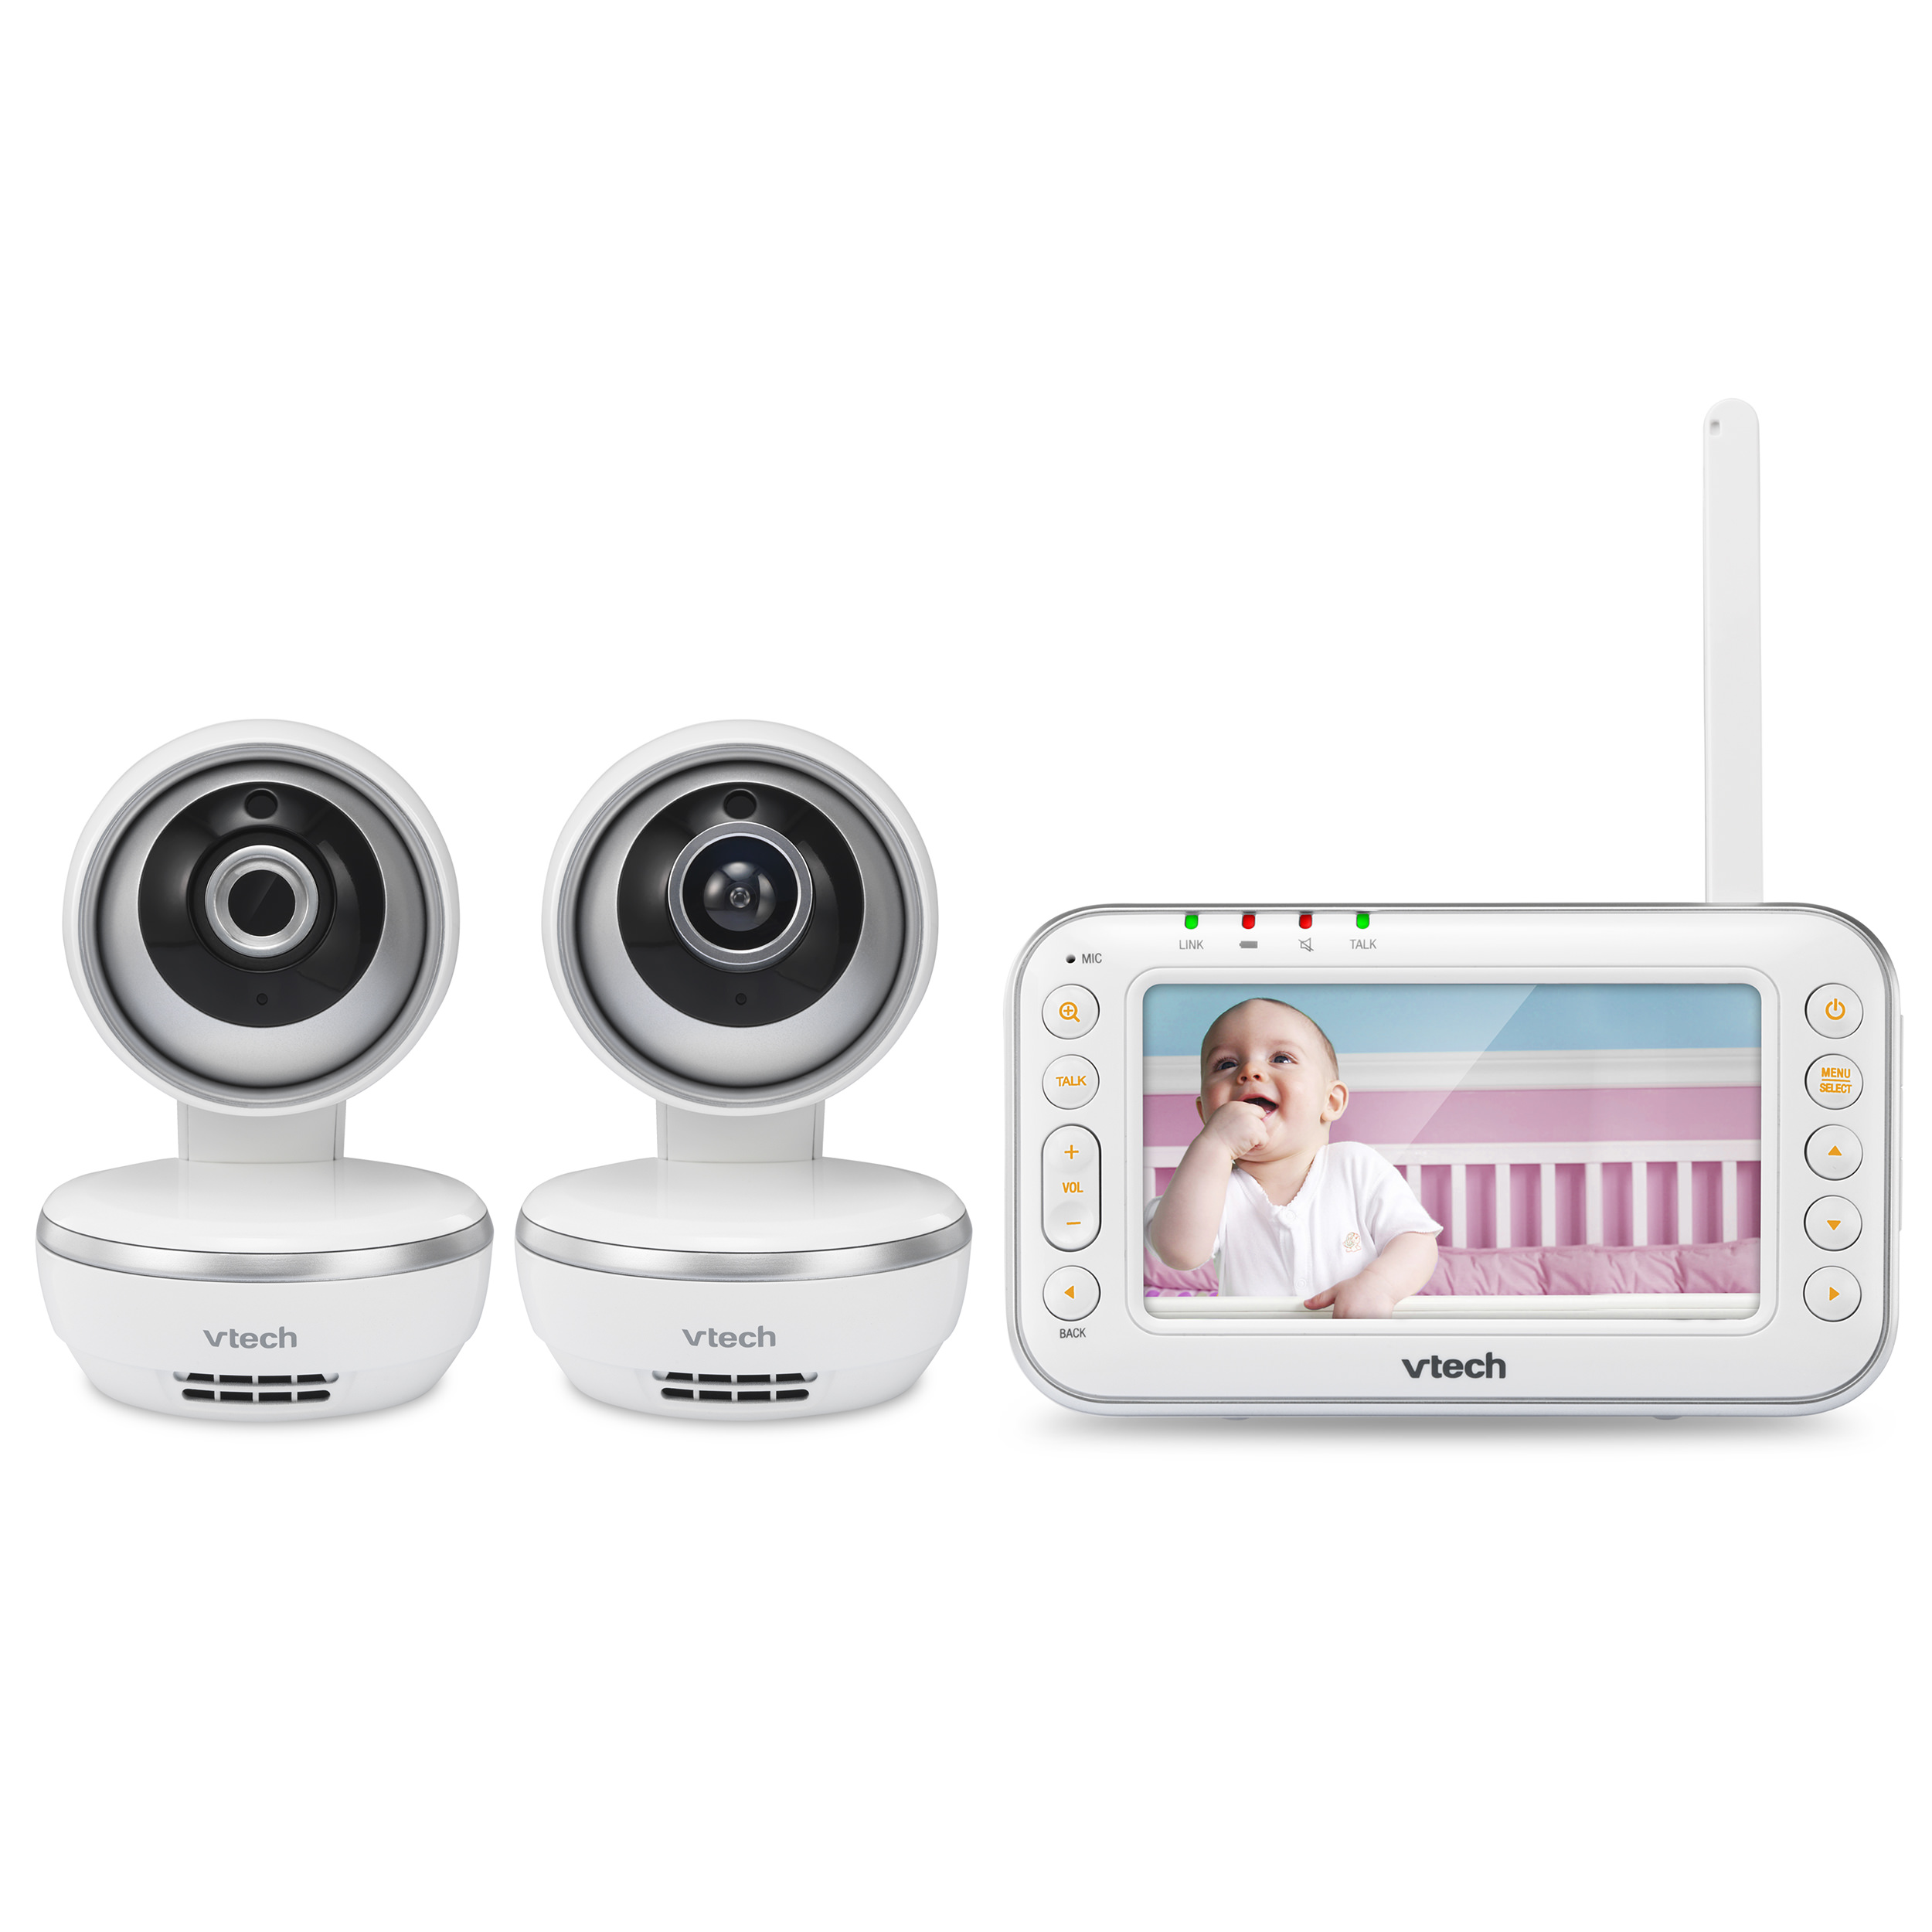 VTech VM4261-2 4.3′ Digital Video Baby Monitor with 2 Pan & Tilt Cameras and Wide-Angle Lens and Standard Lens